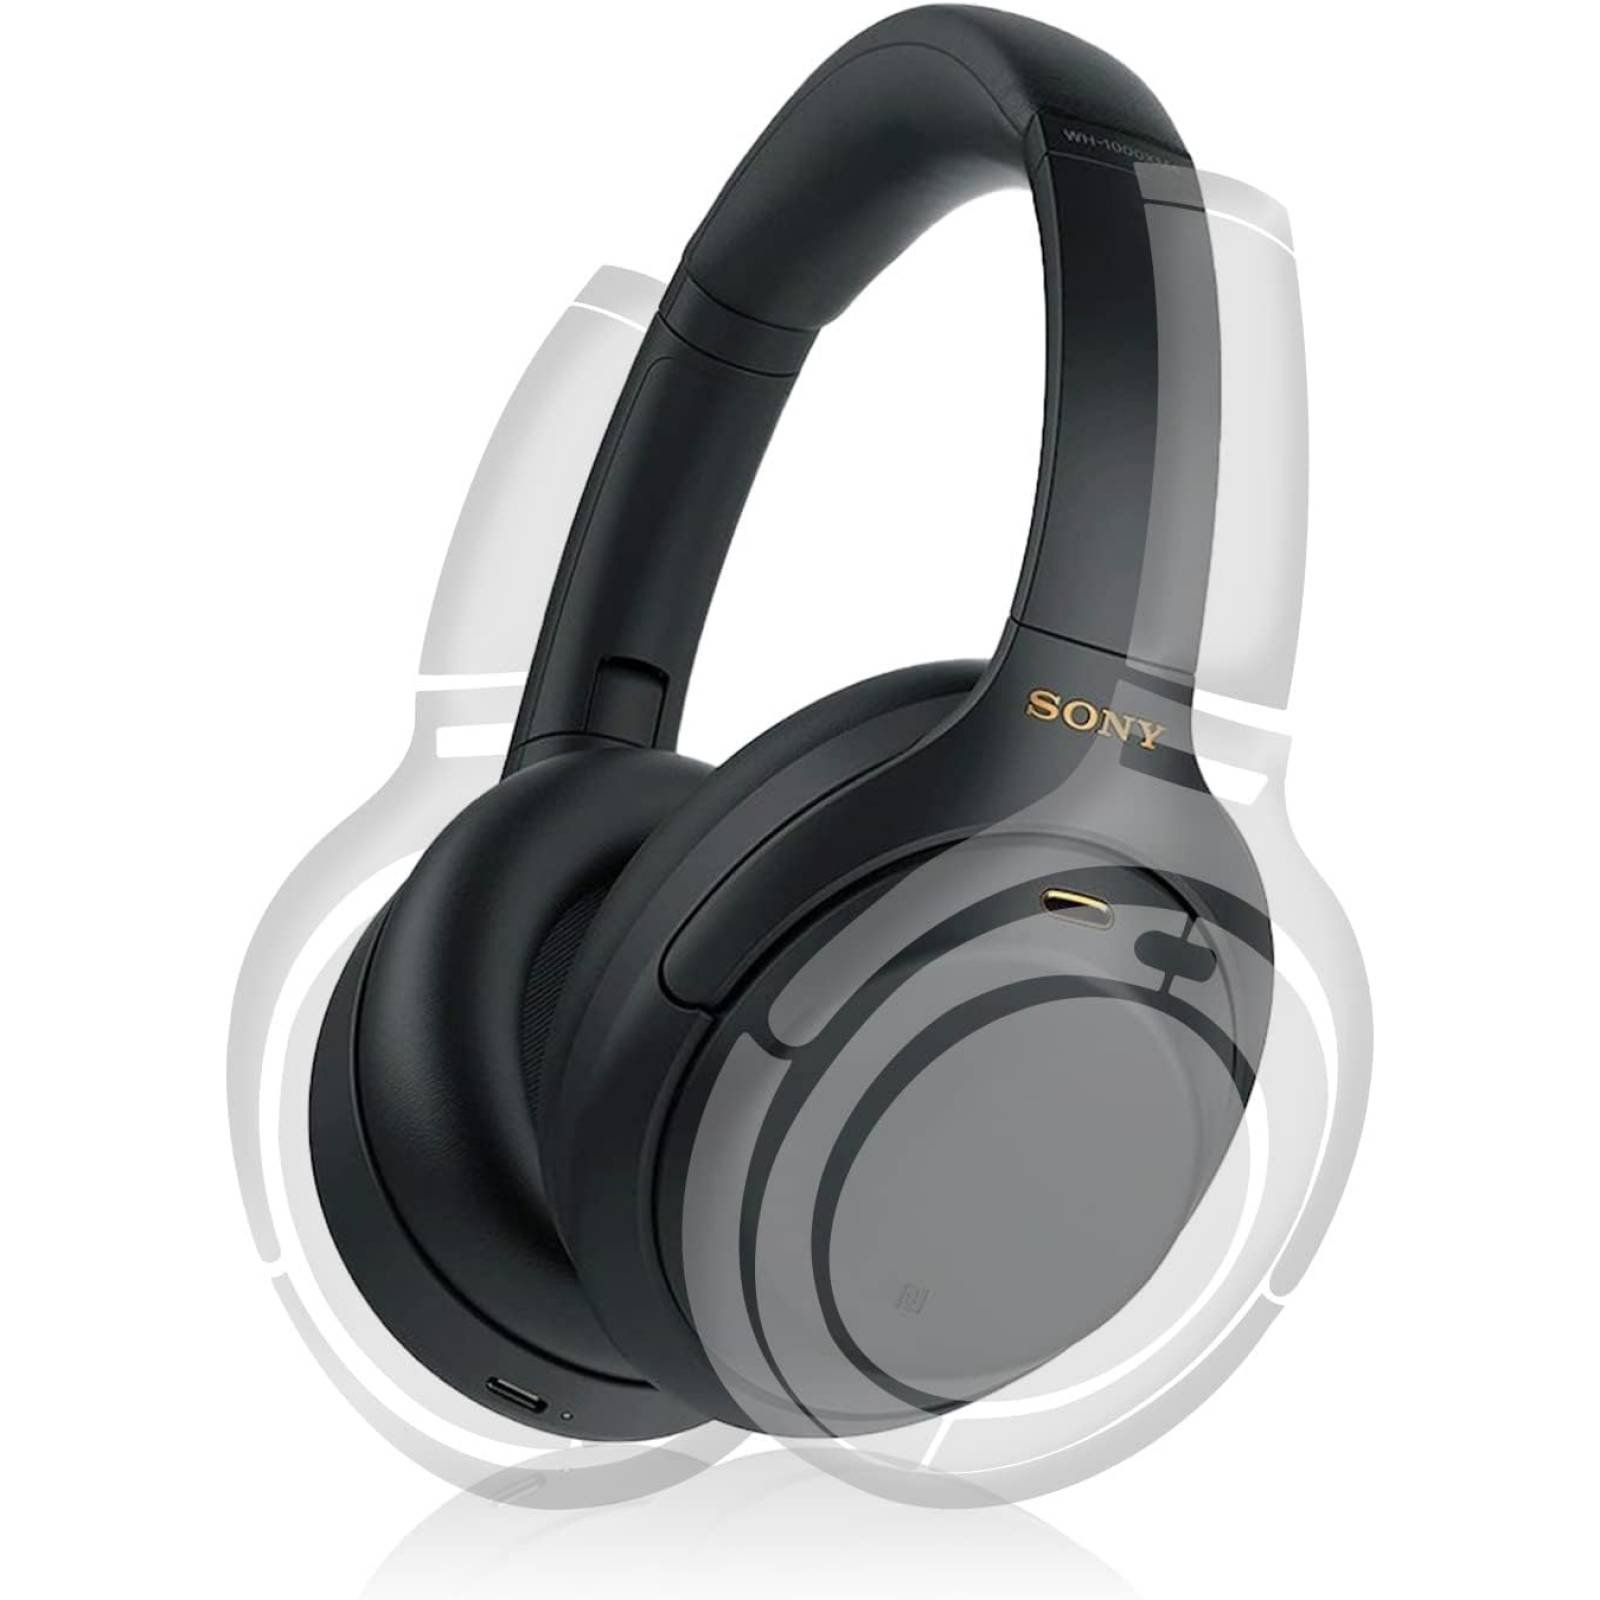 Auriculares Bluetooth Noise Cancelling - Sony Wh-1000xm4 - Color Plateado